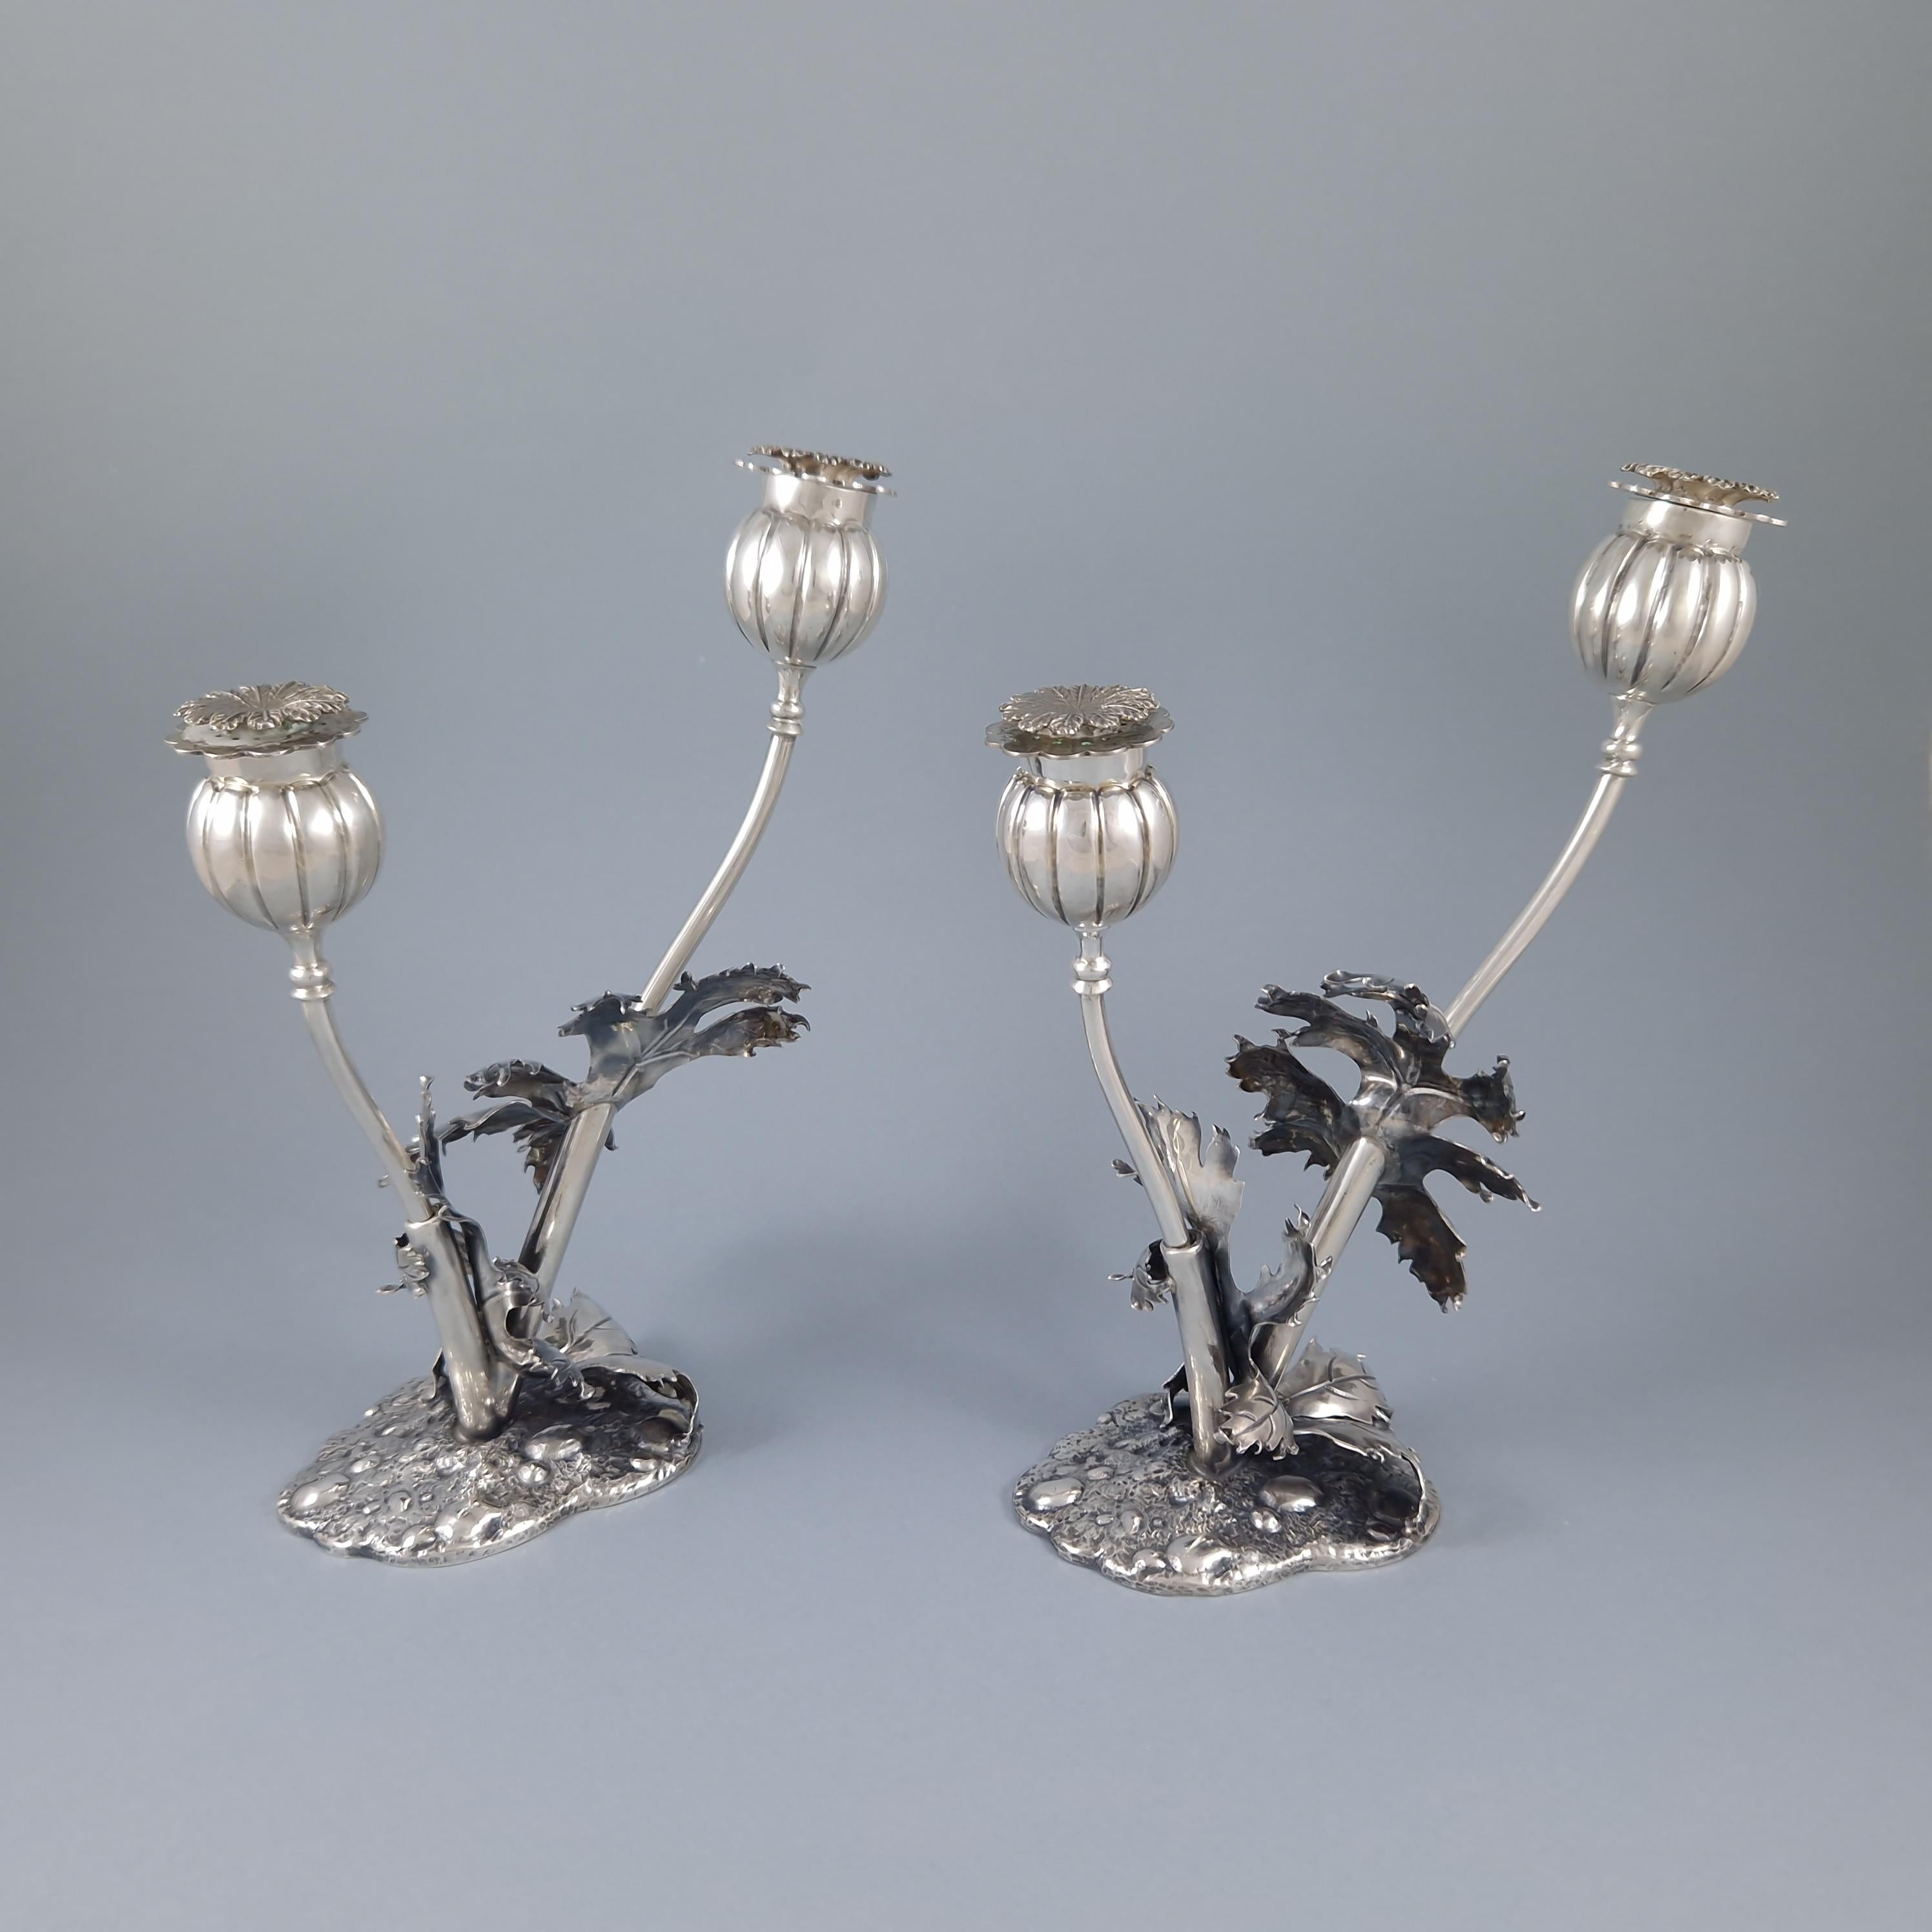 Italian Buccellati - Pair Of Salt And Pepper Shakers In Sterling Silver